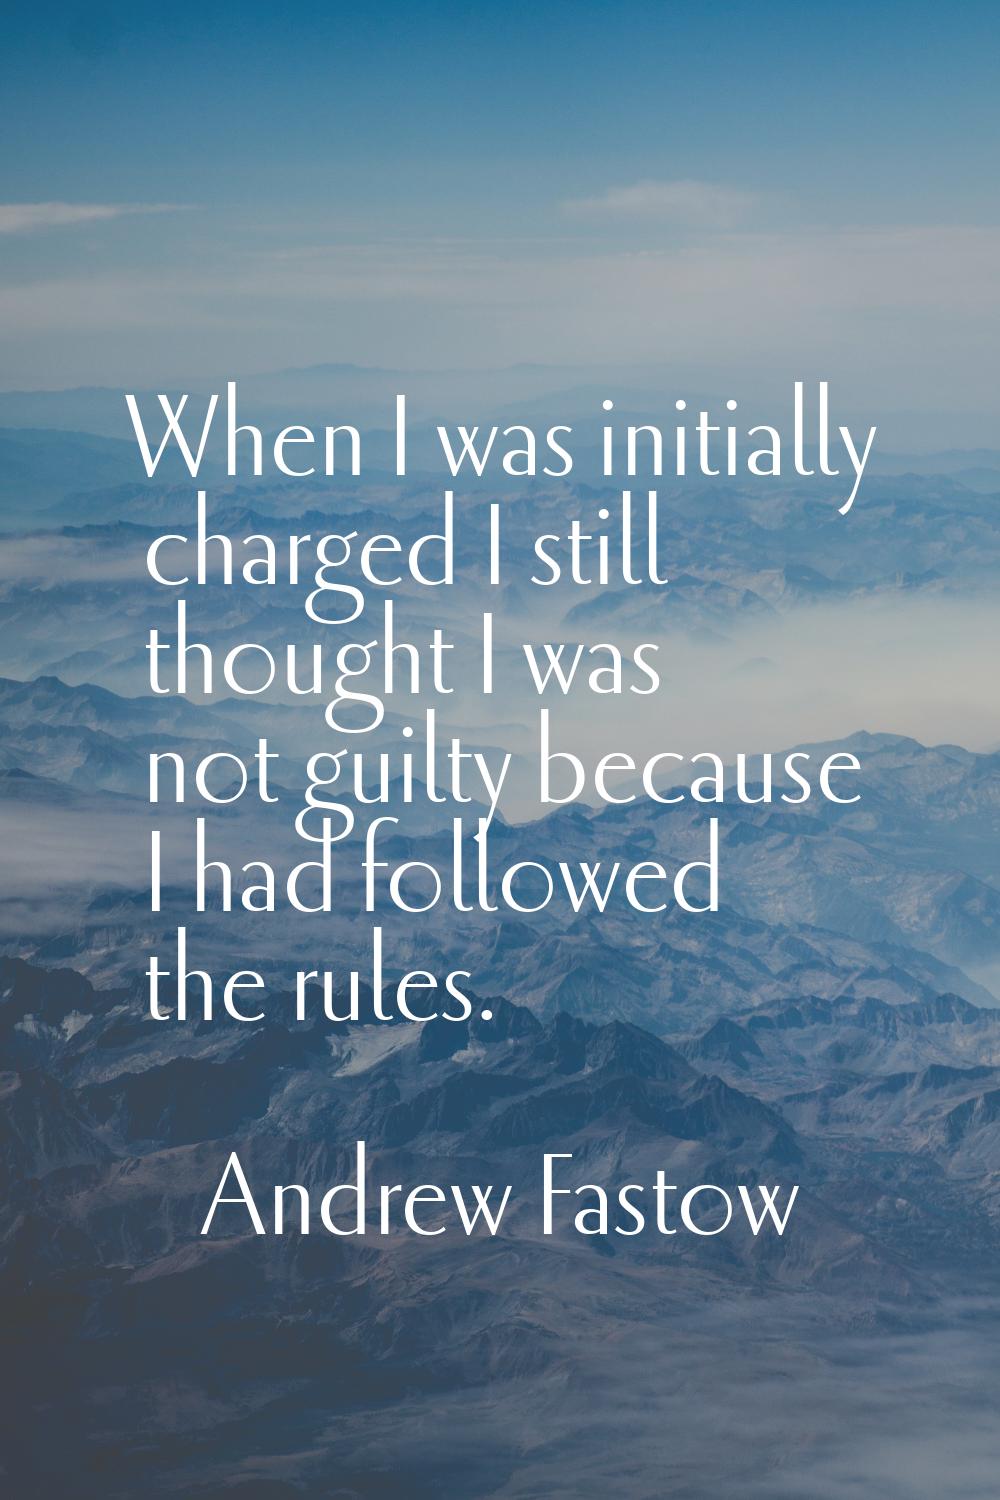 When I was initially charged I still thought I was not guilty because I had followed the rules.